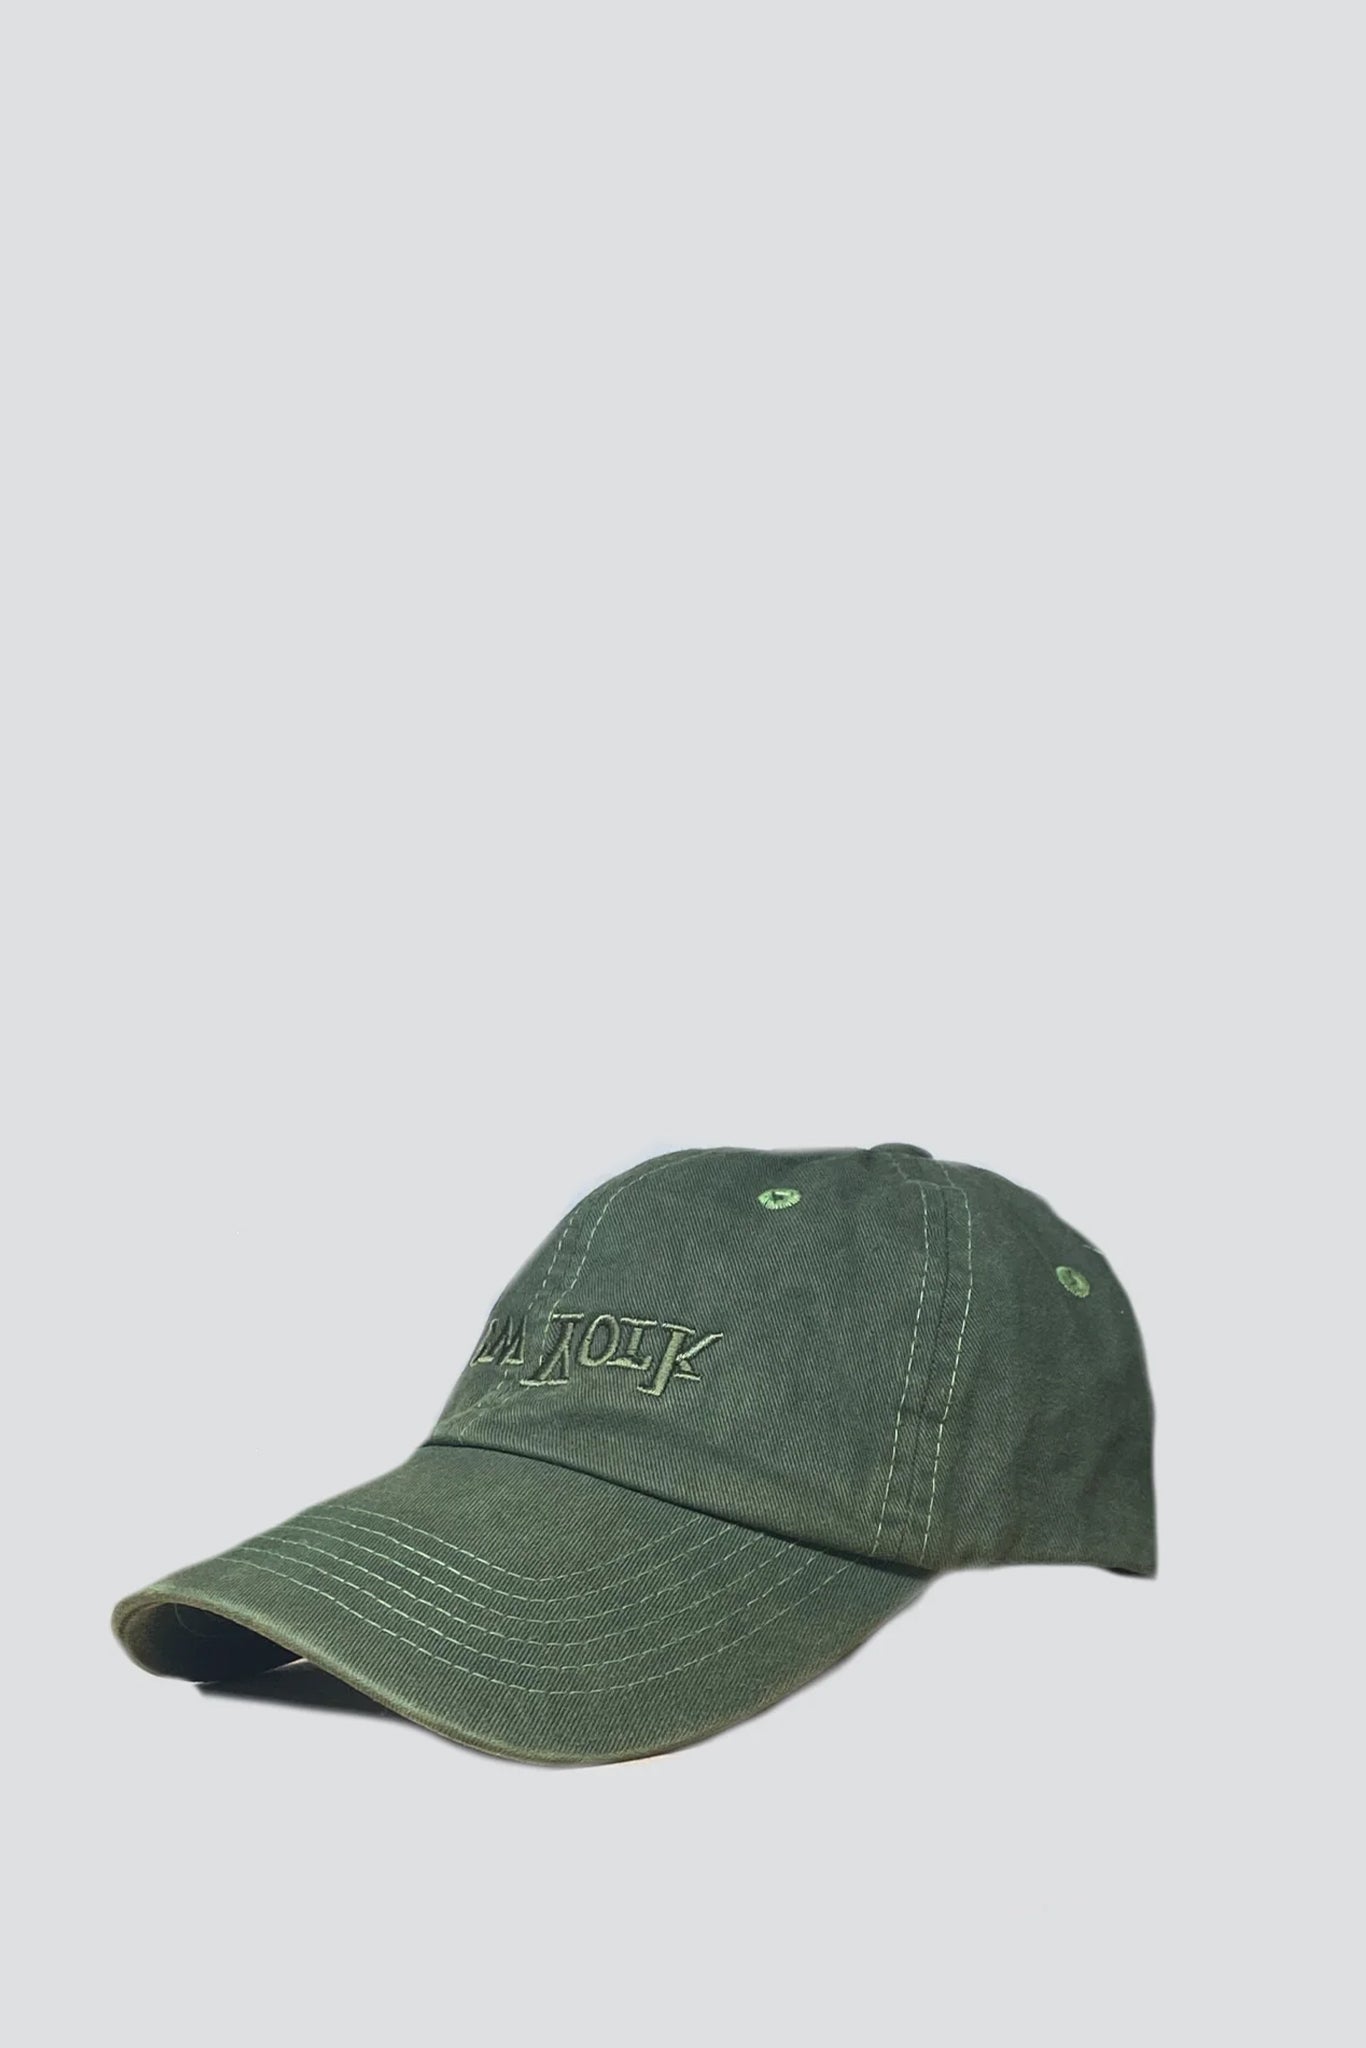 New York Embroidered Hat - Pine